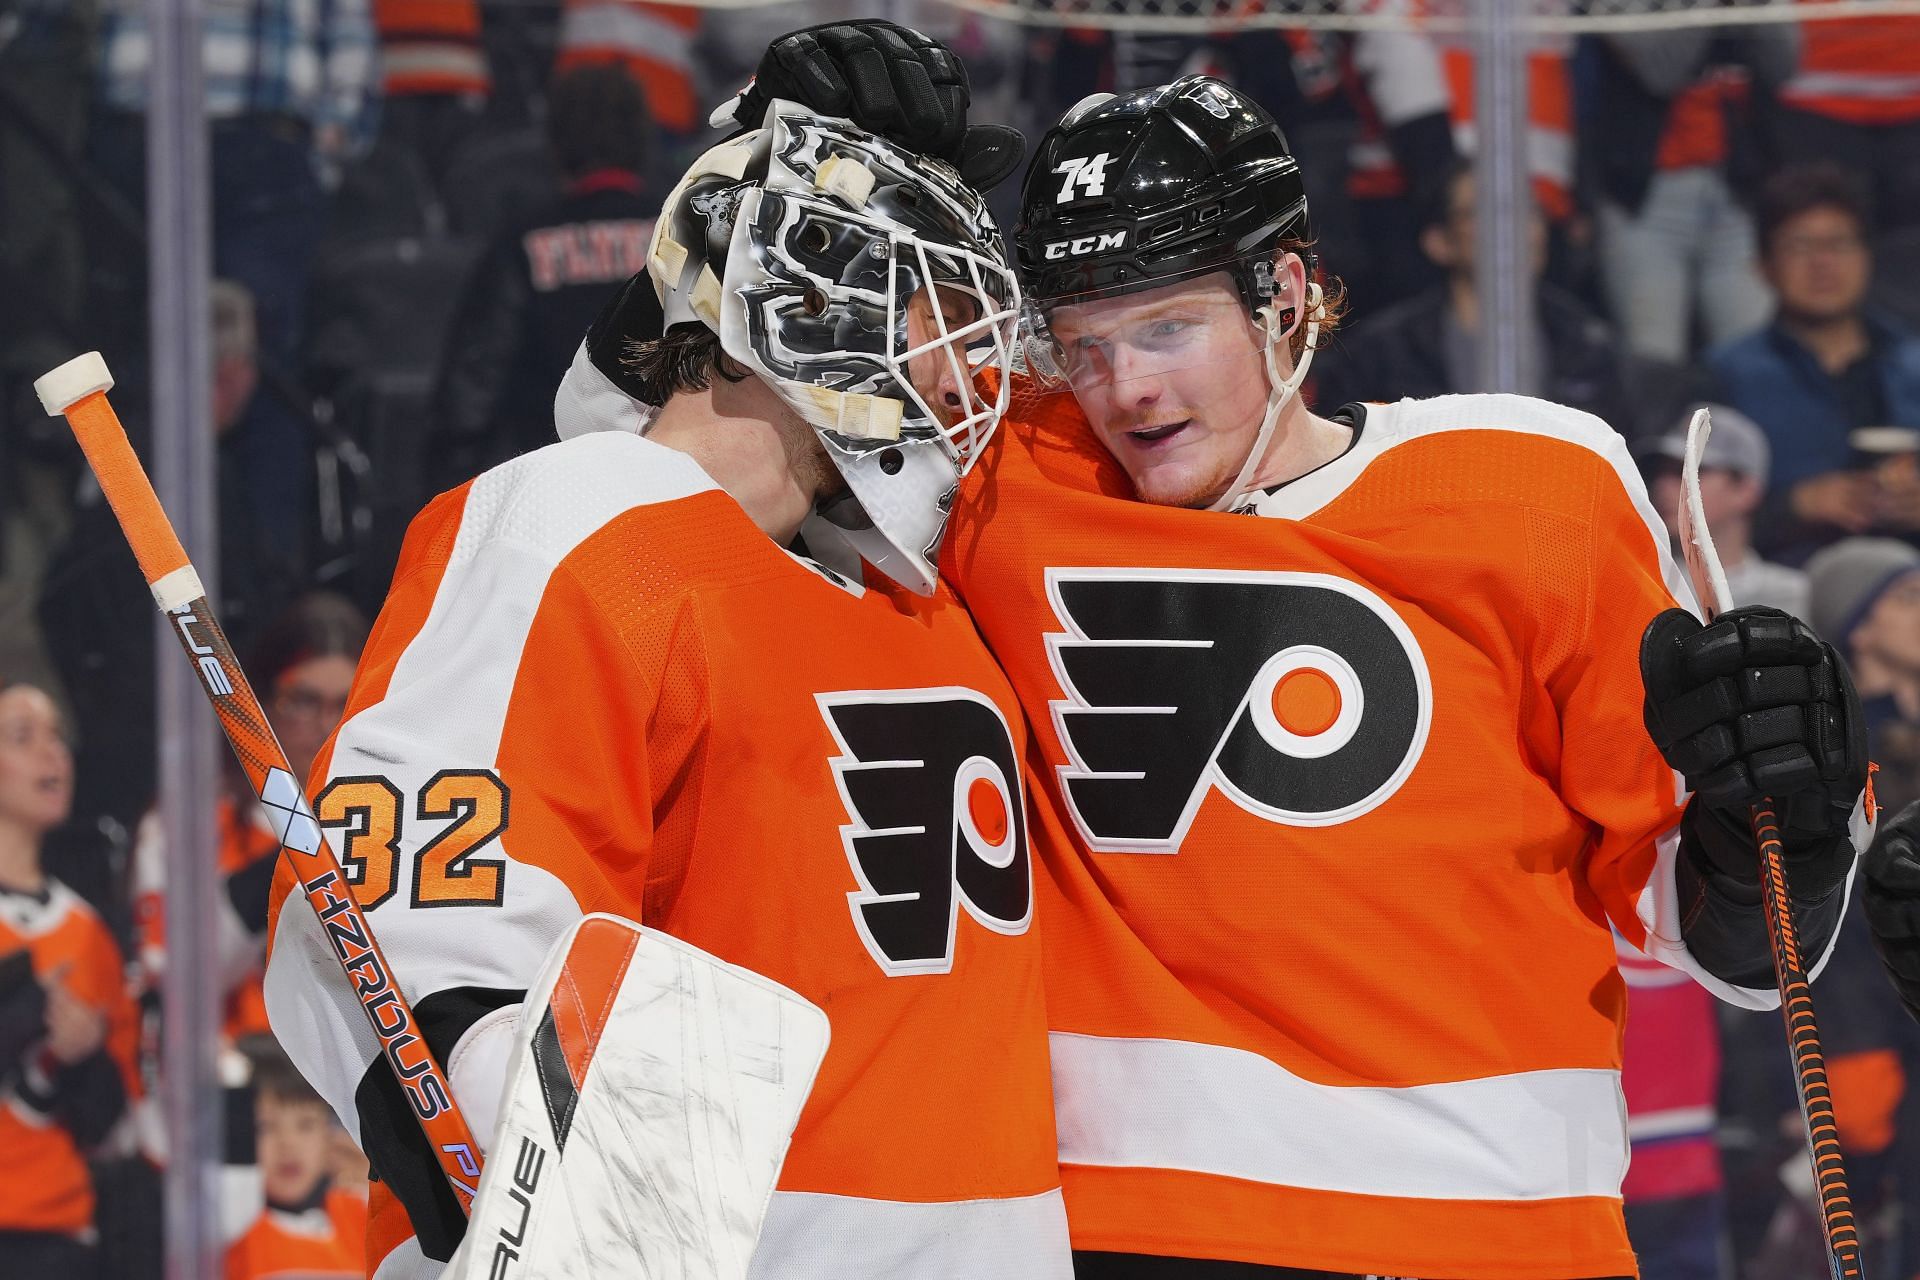 Flyers' Newest Player Tony DeAngelo - What to Expect